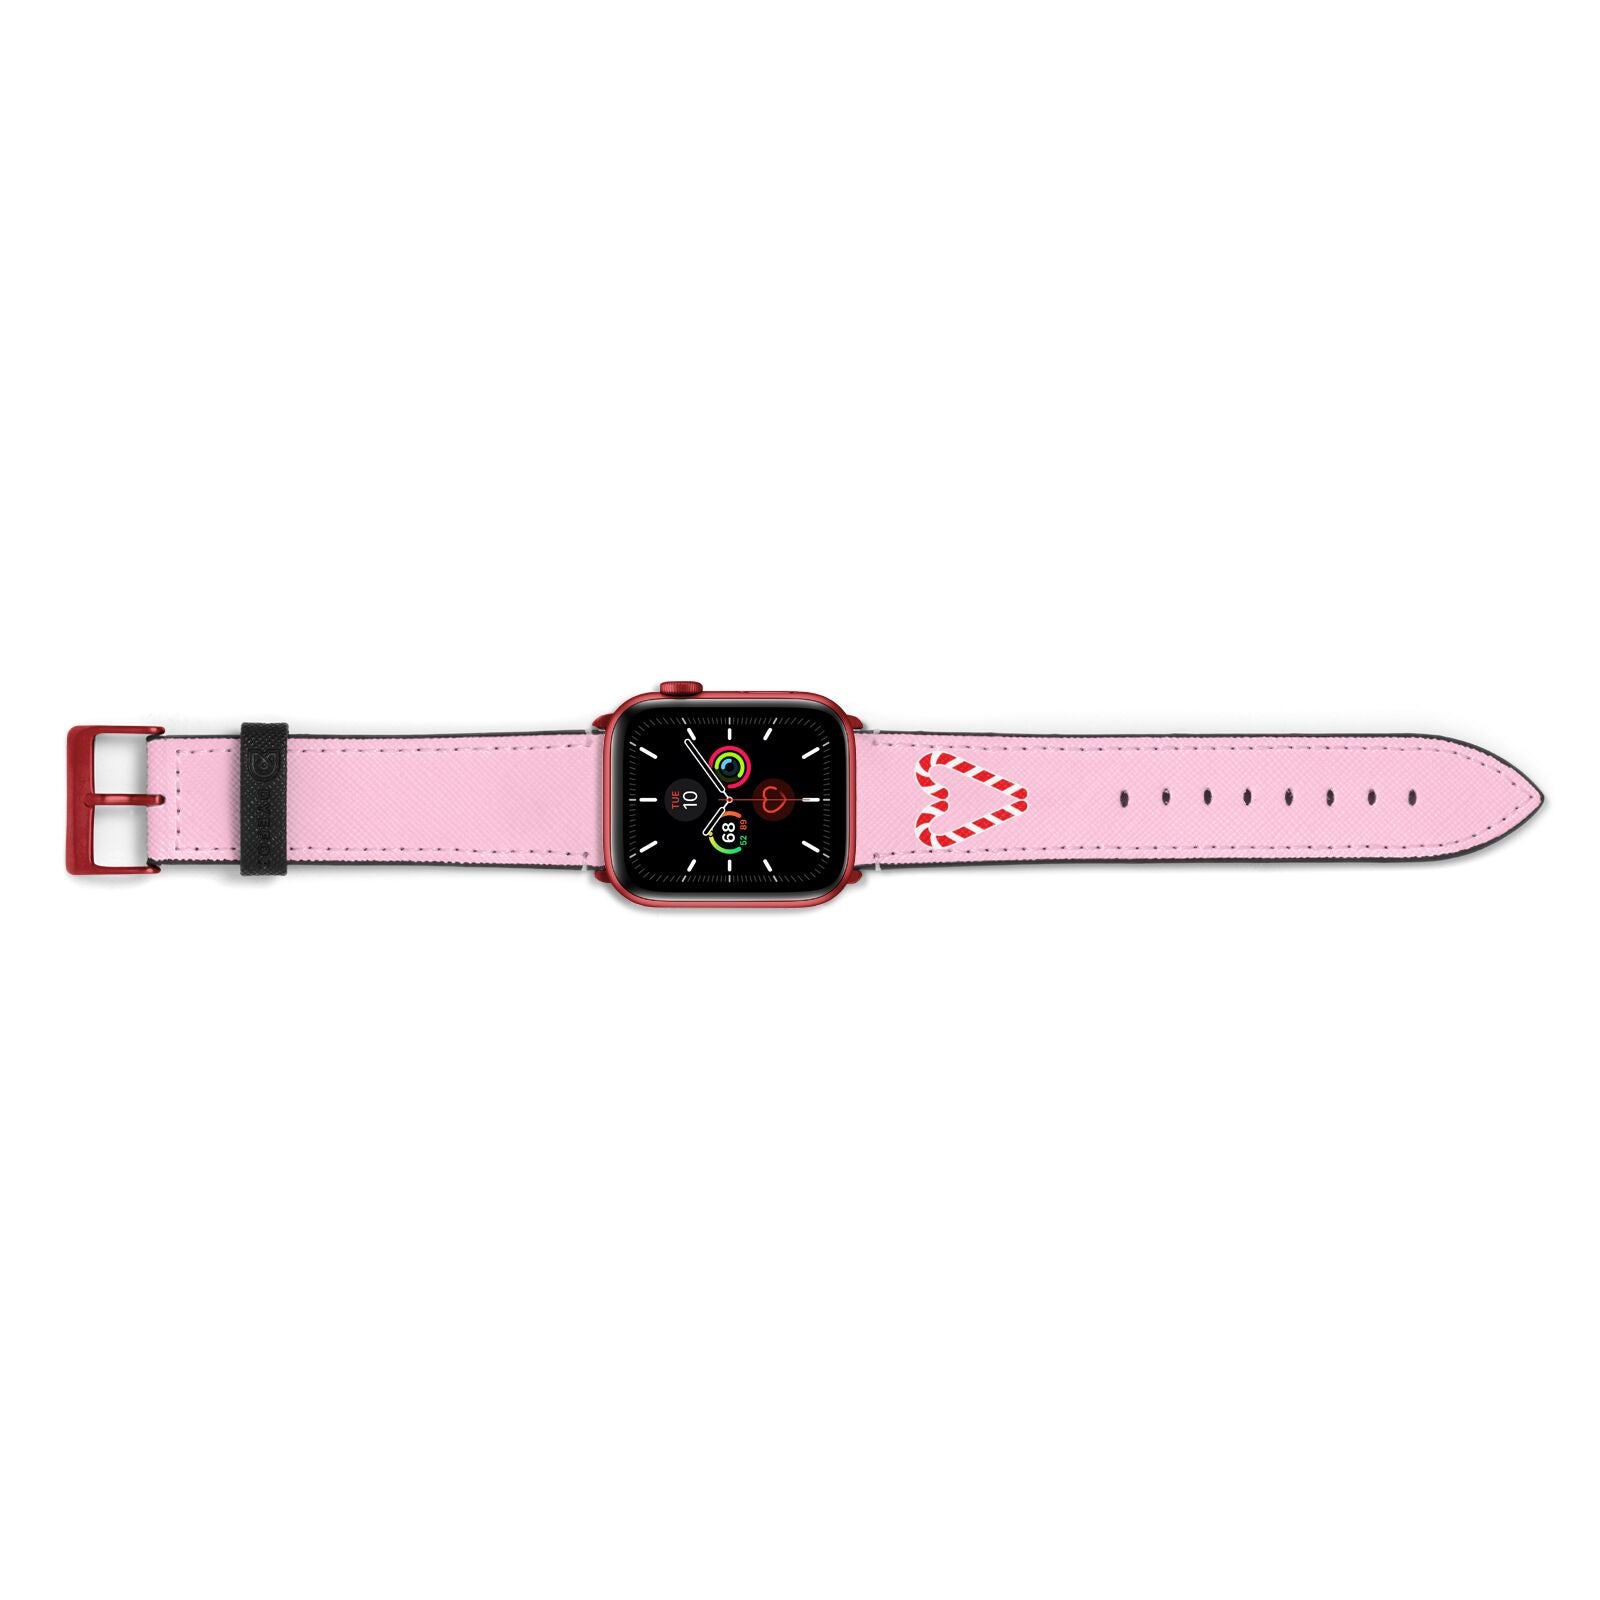 Candy Cane Heart Apple Watch Strap Landscape Image Red Hardware